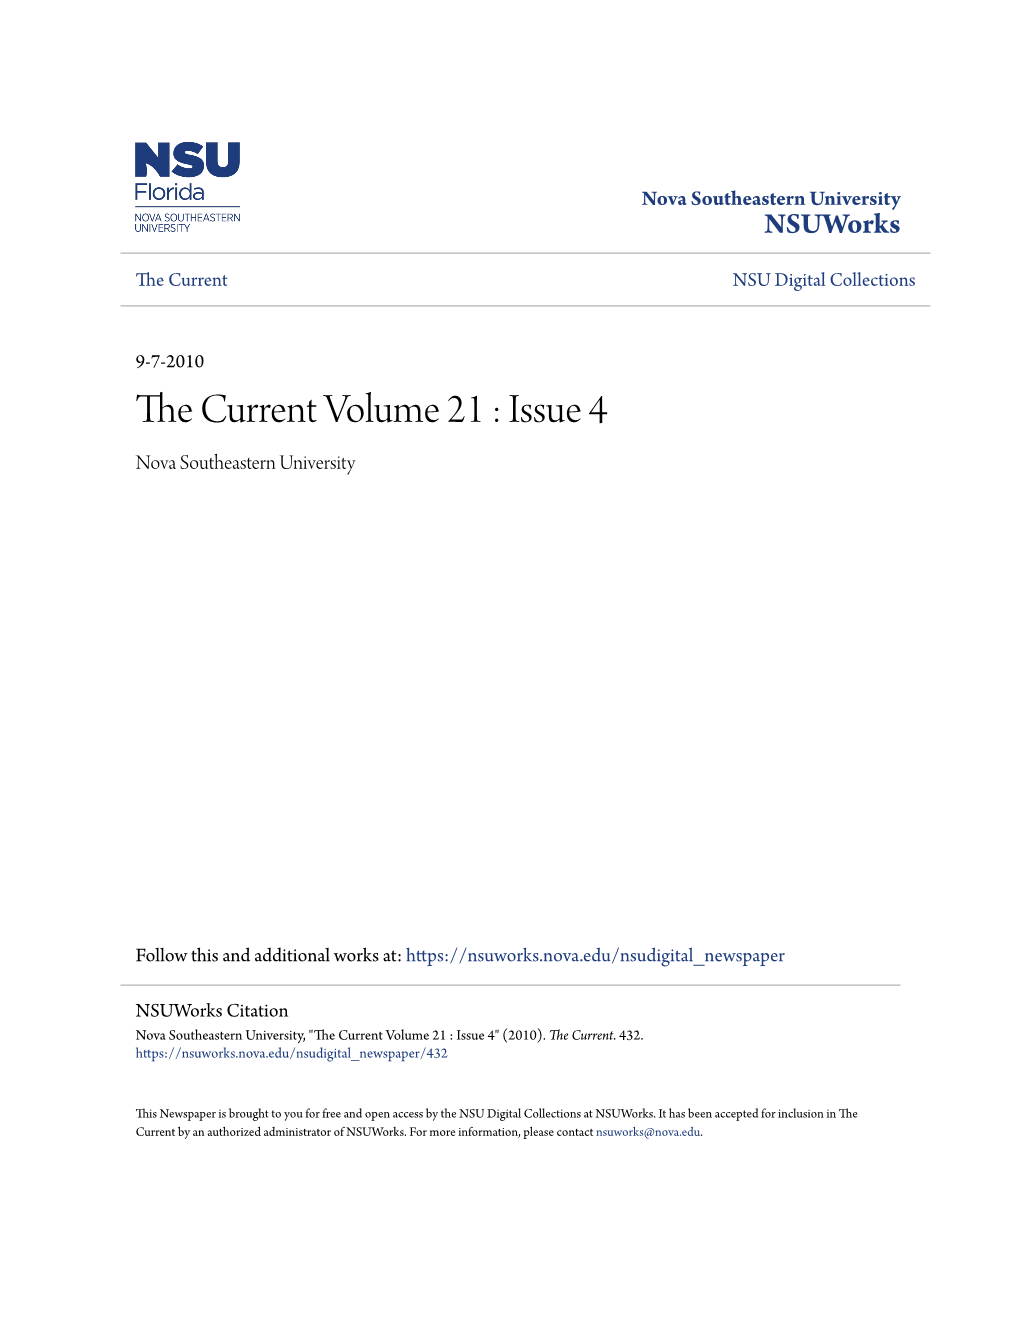 The Current Volume 21 : Issue 4